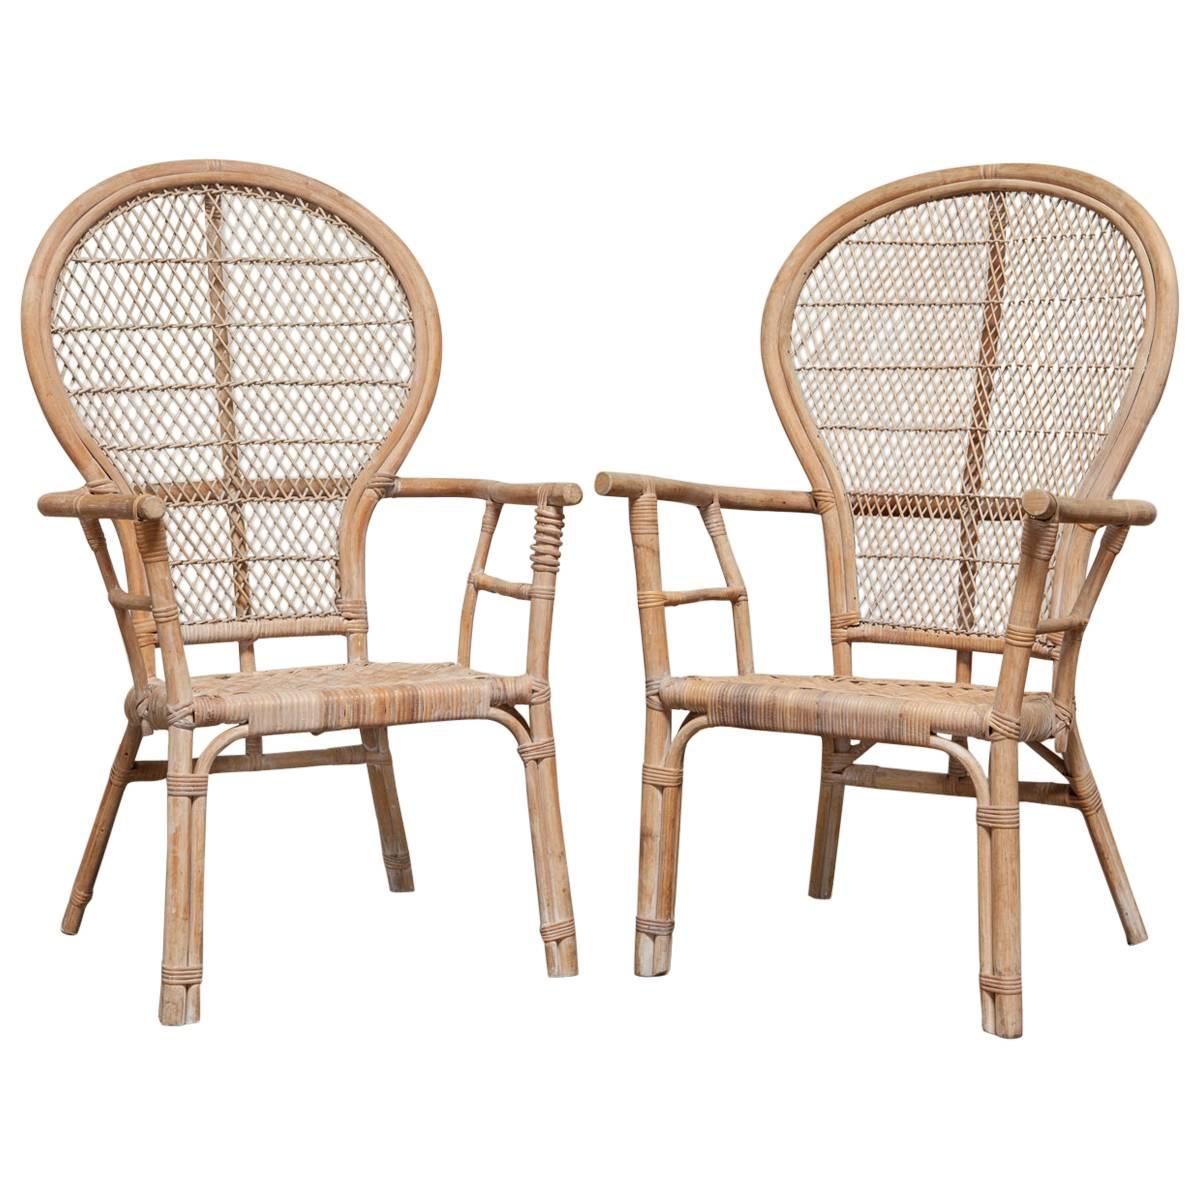 Pair of Rattan Fan-Back Peacock Chairs